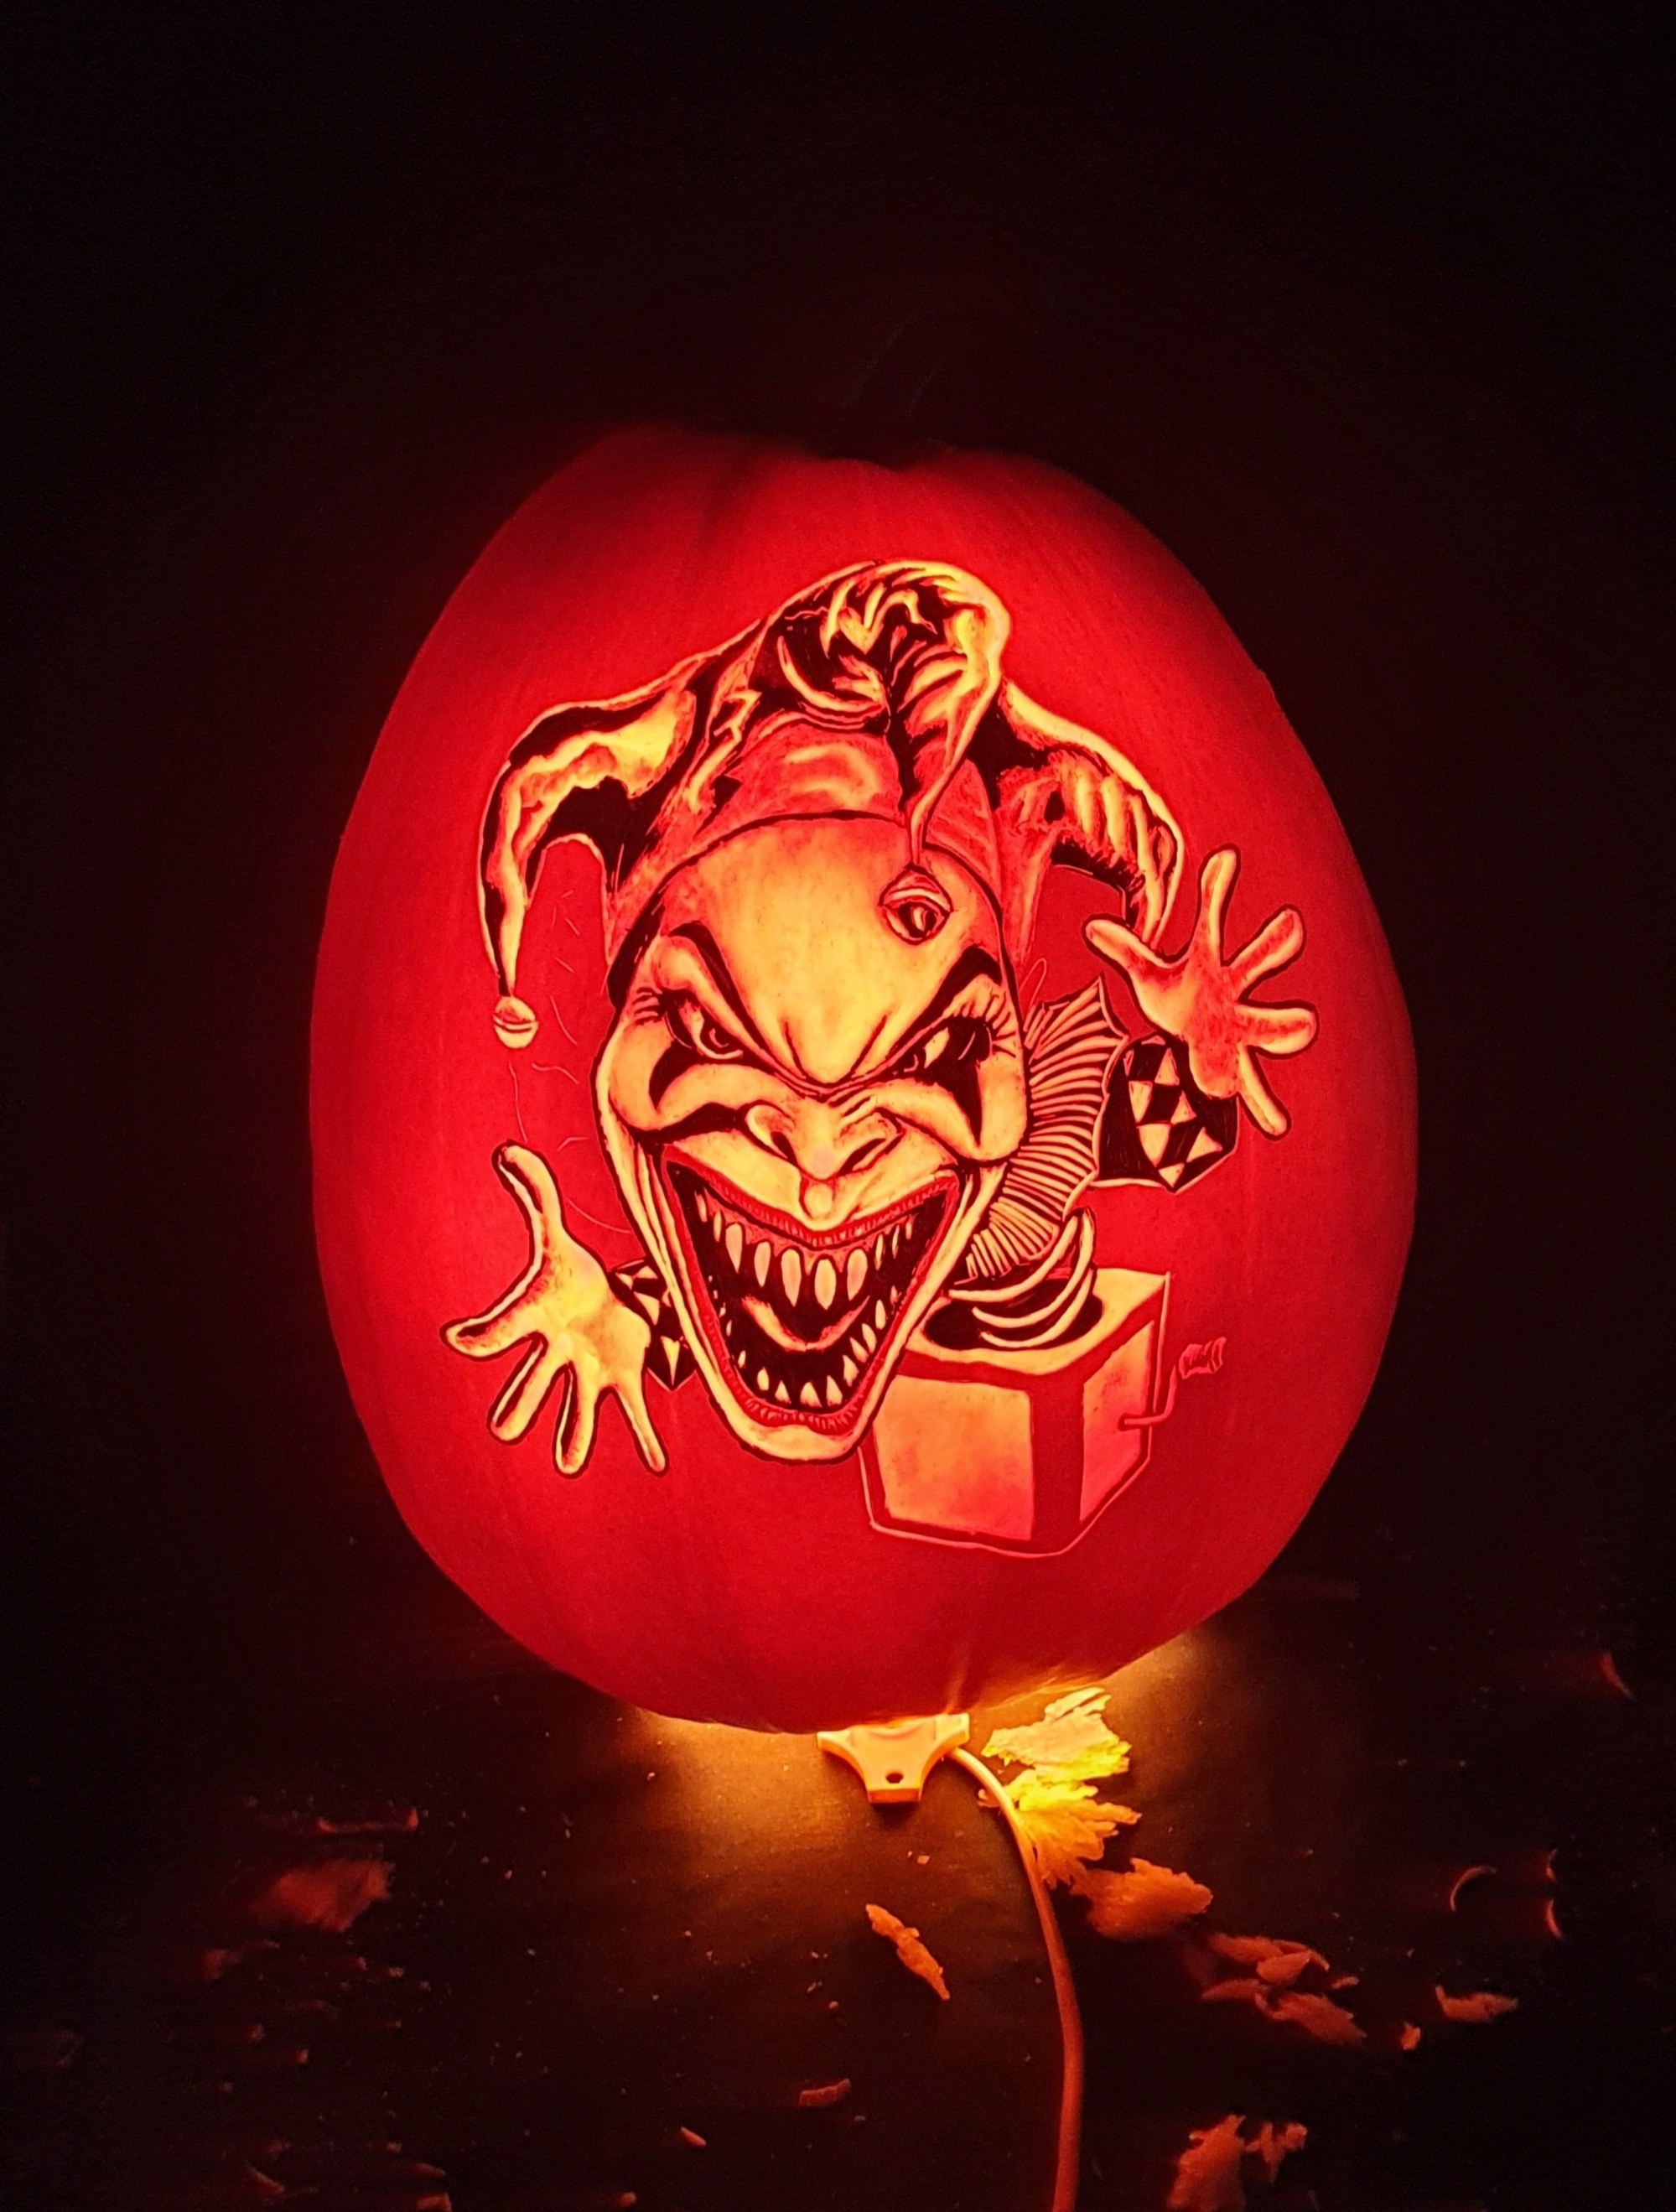 an evil jack in the box toy carved on a pumpkin